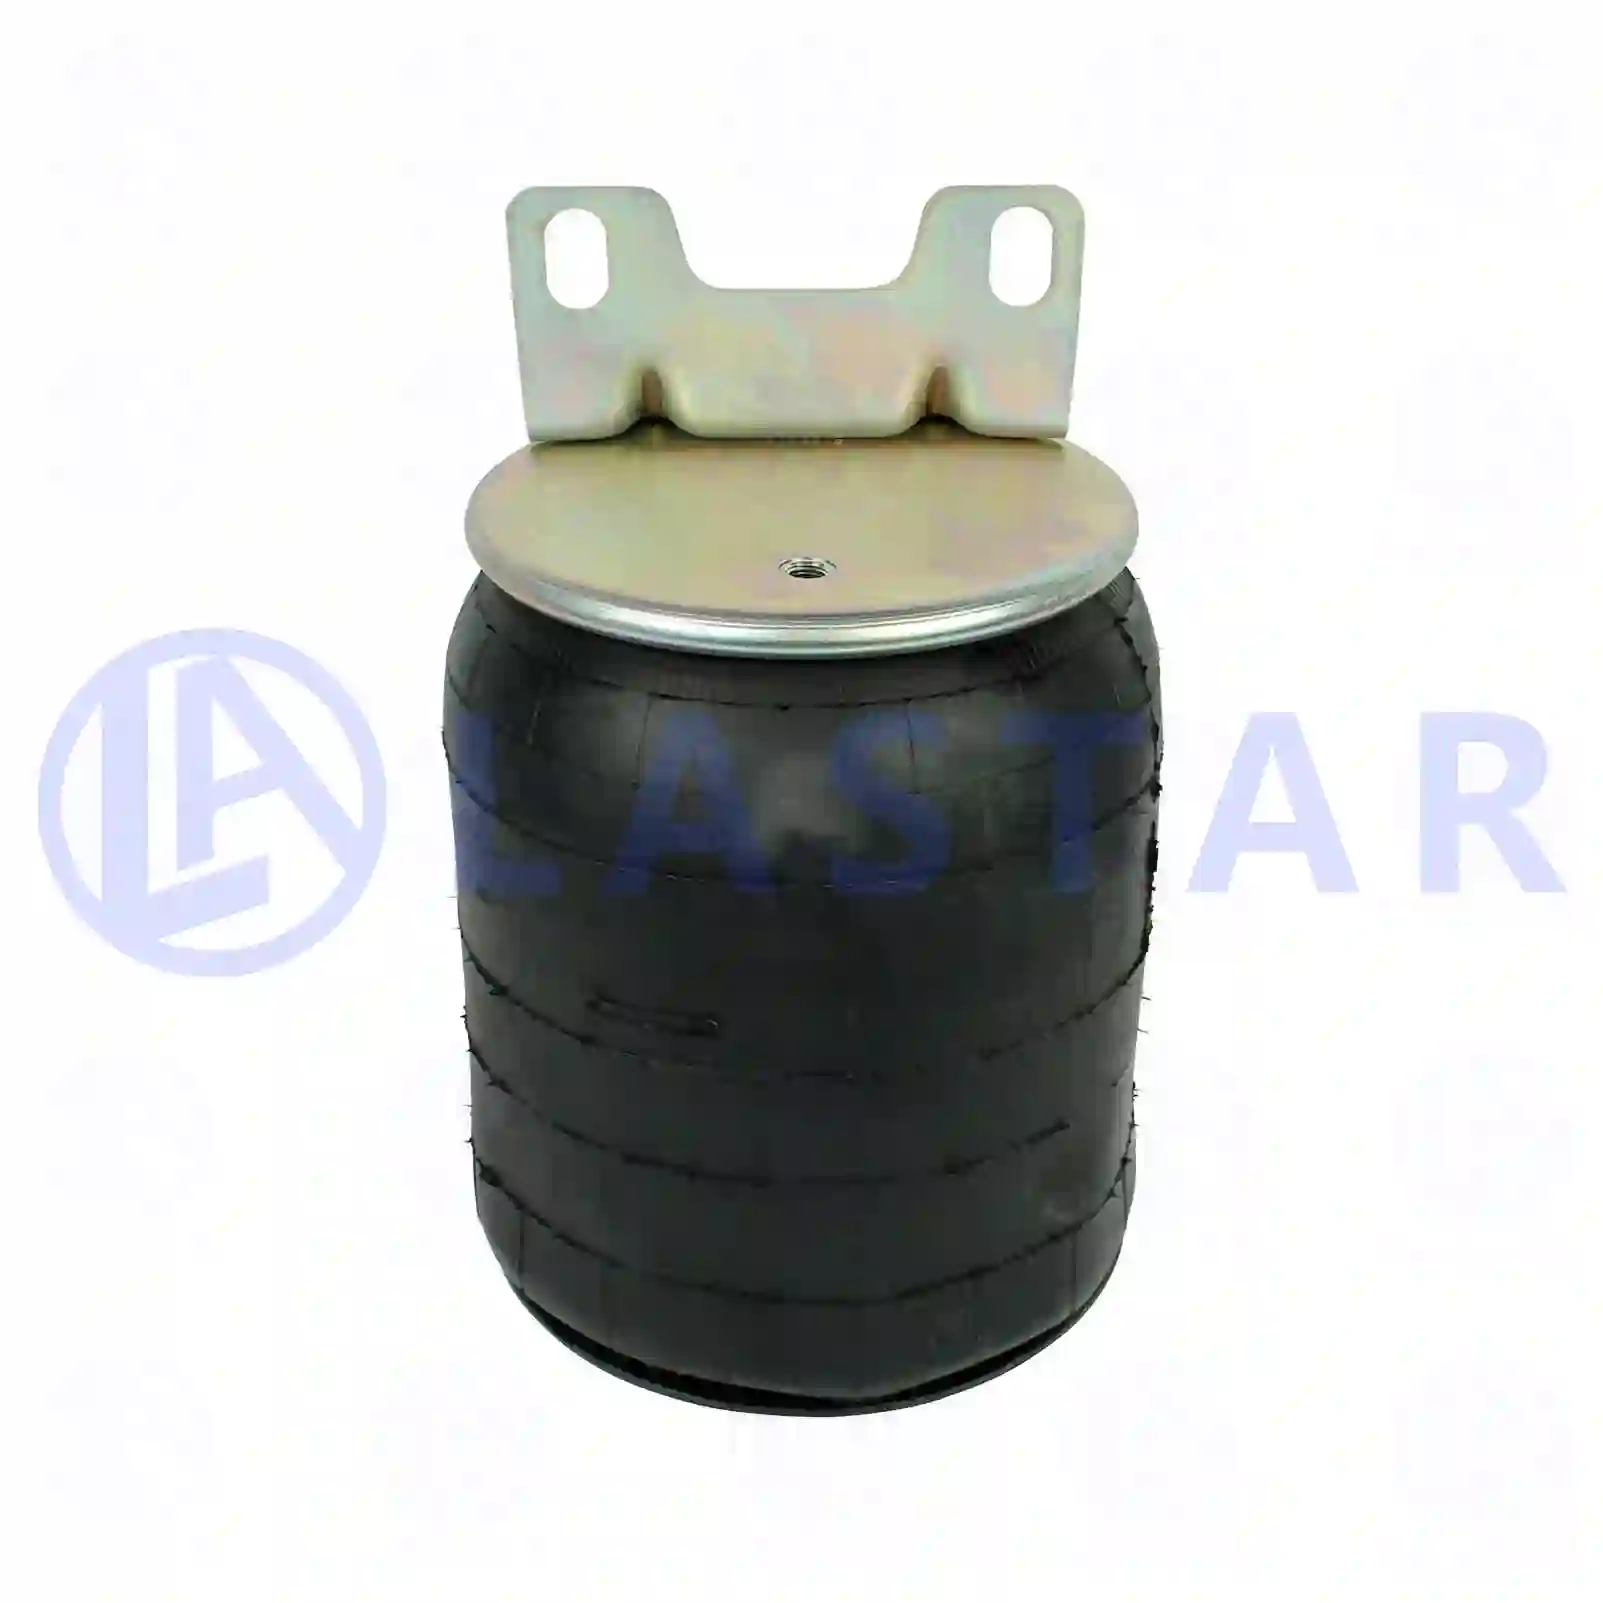 Air spring, with plastic piston, 77728514, 57122-2, ZG40723-0008 ||  77728514 Lastar Spare Part | Truck Spare Parts, Auotomotive Spare Parts Air spring, with plastic piston, 77728514, 57122-2, ZG40723-0008 ||  77728514 Lastar Spare Part | Truck Spare Parts, Auotomotive Spare Parts